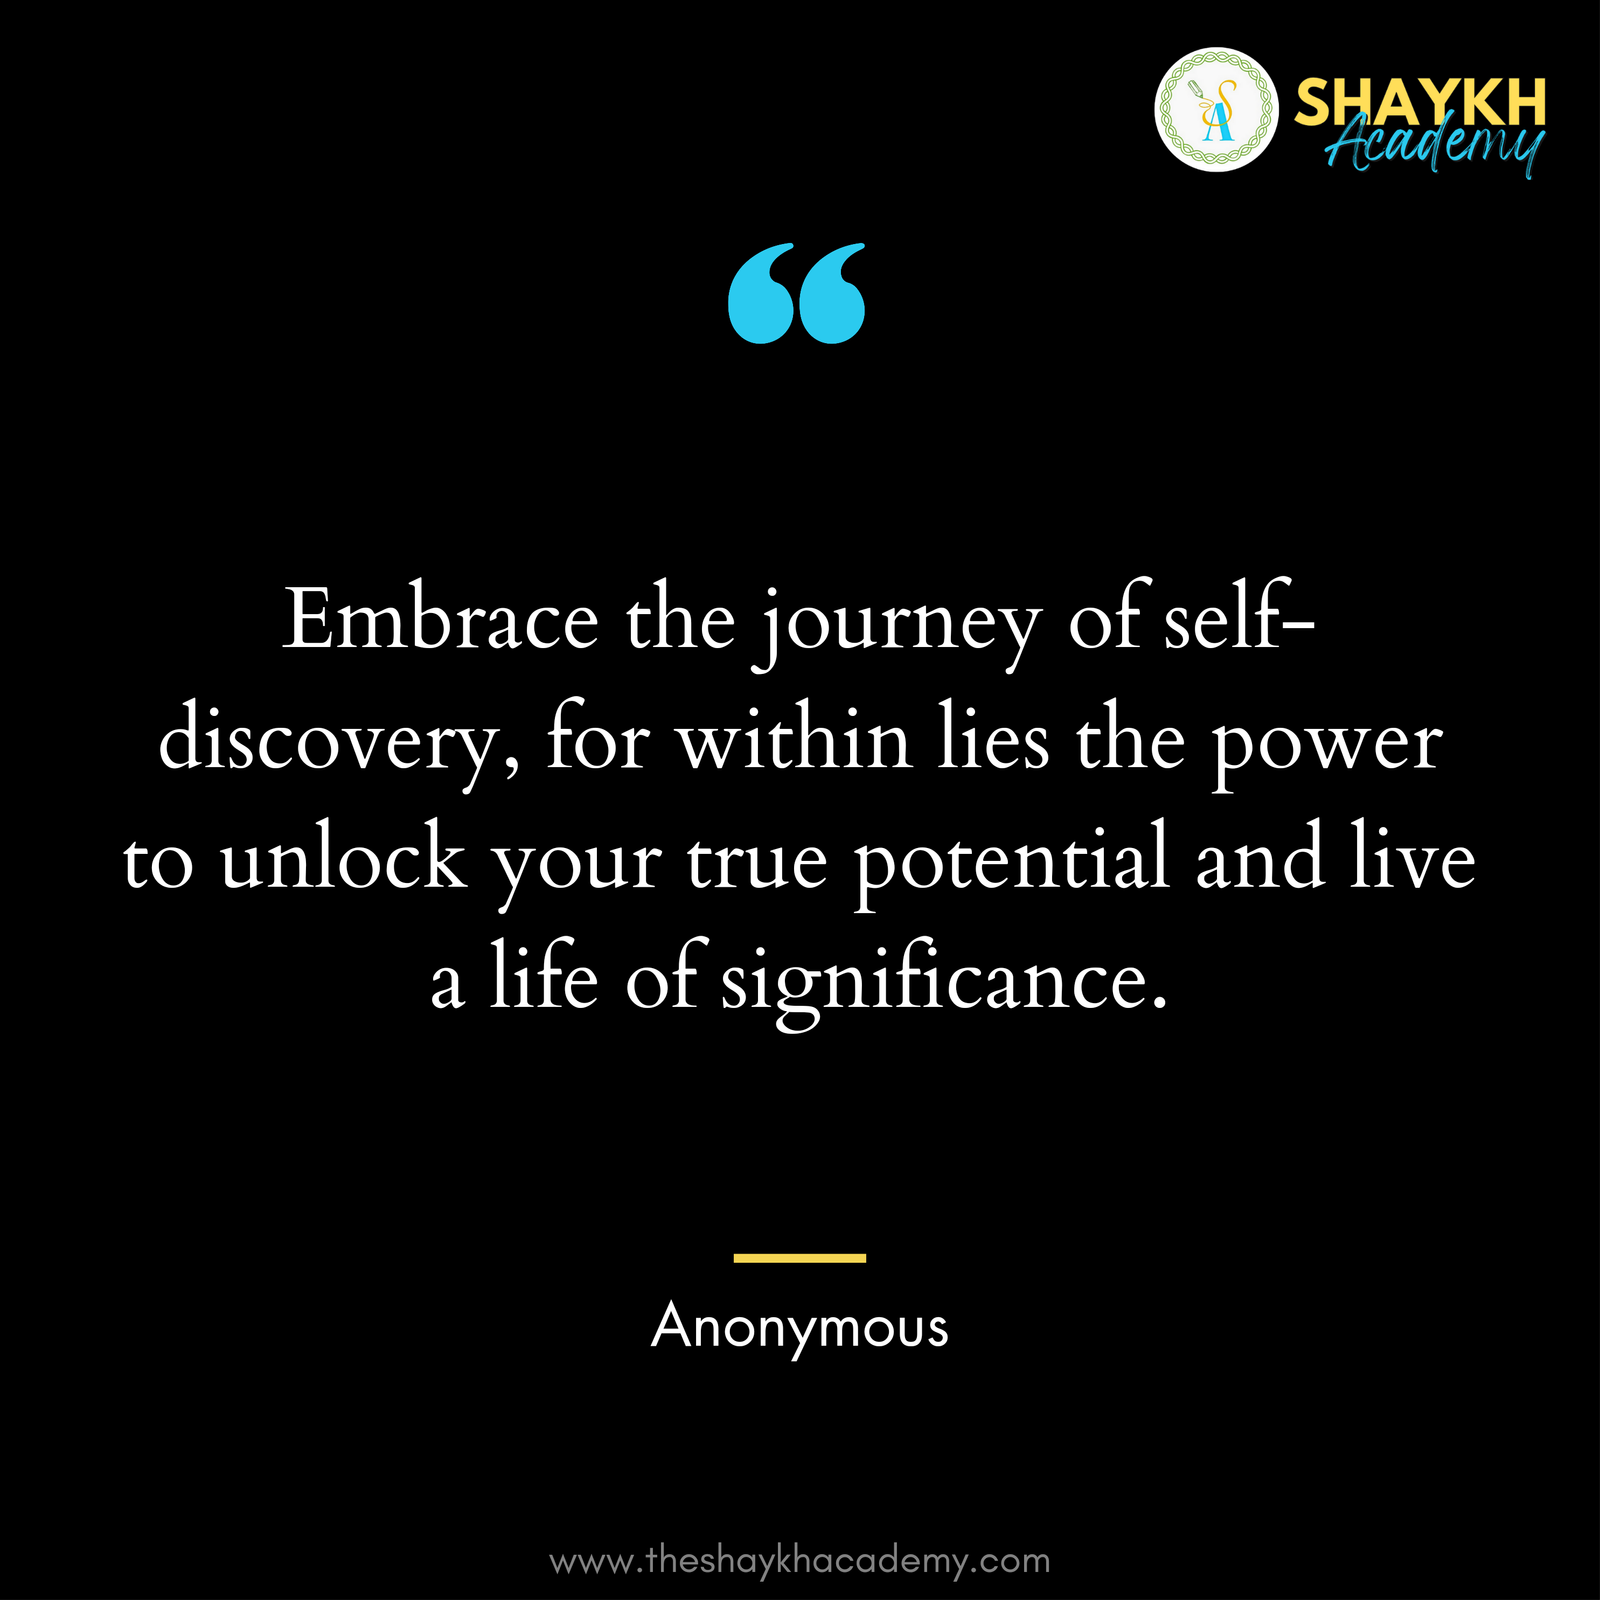 Embrace the journey of self-discovery, for within lies the power to unlock your true potential and live a life of significance.